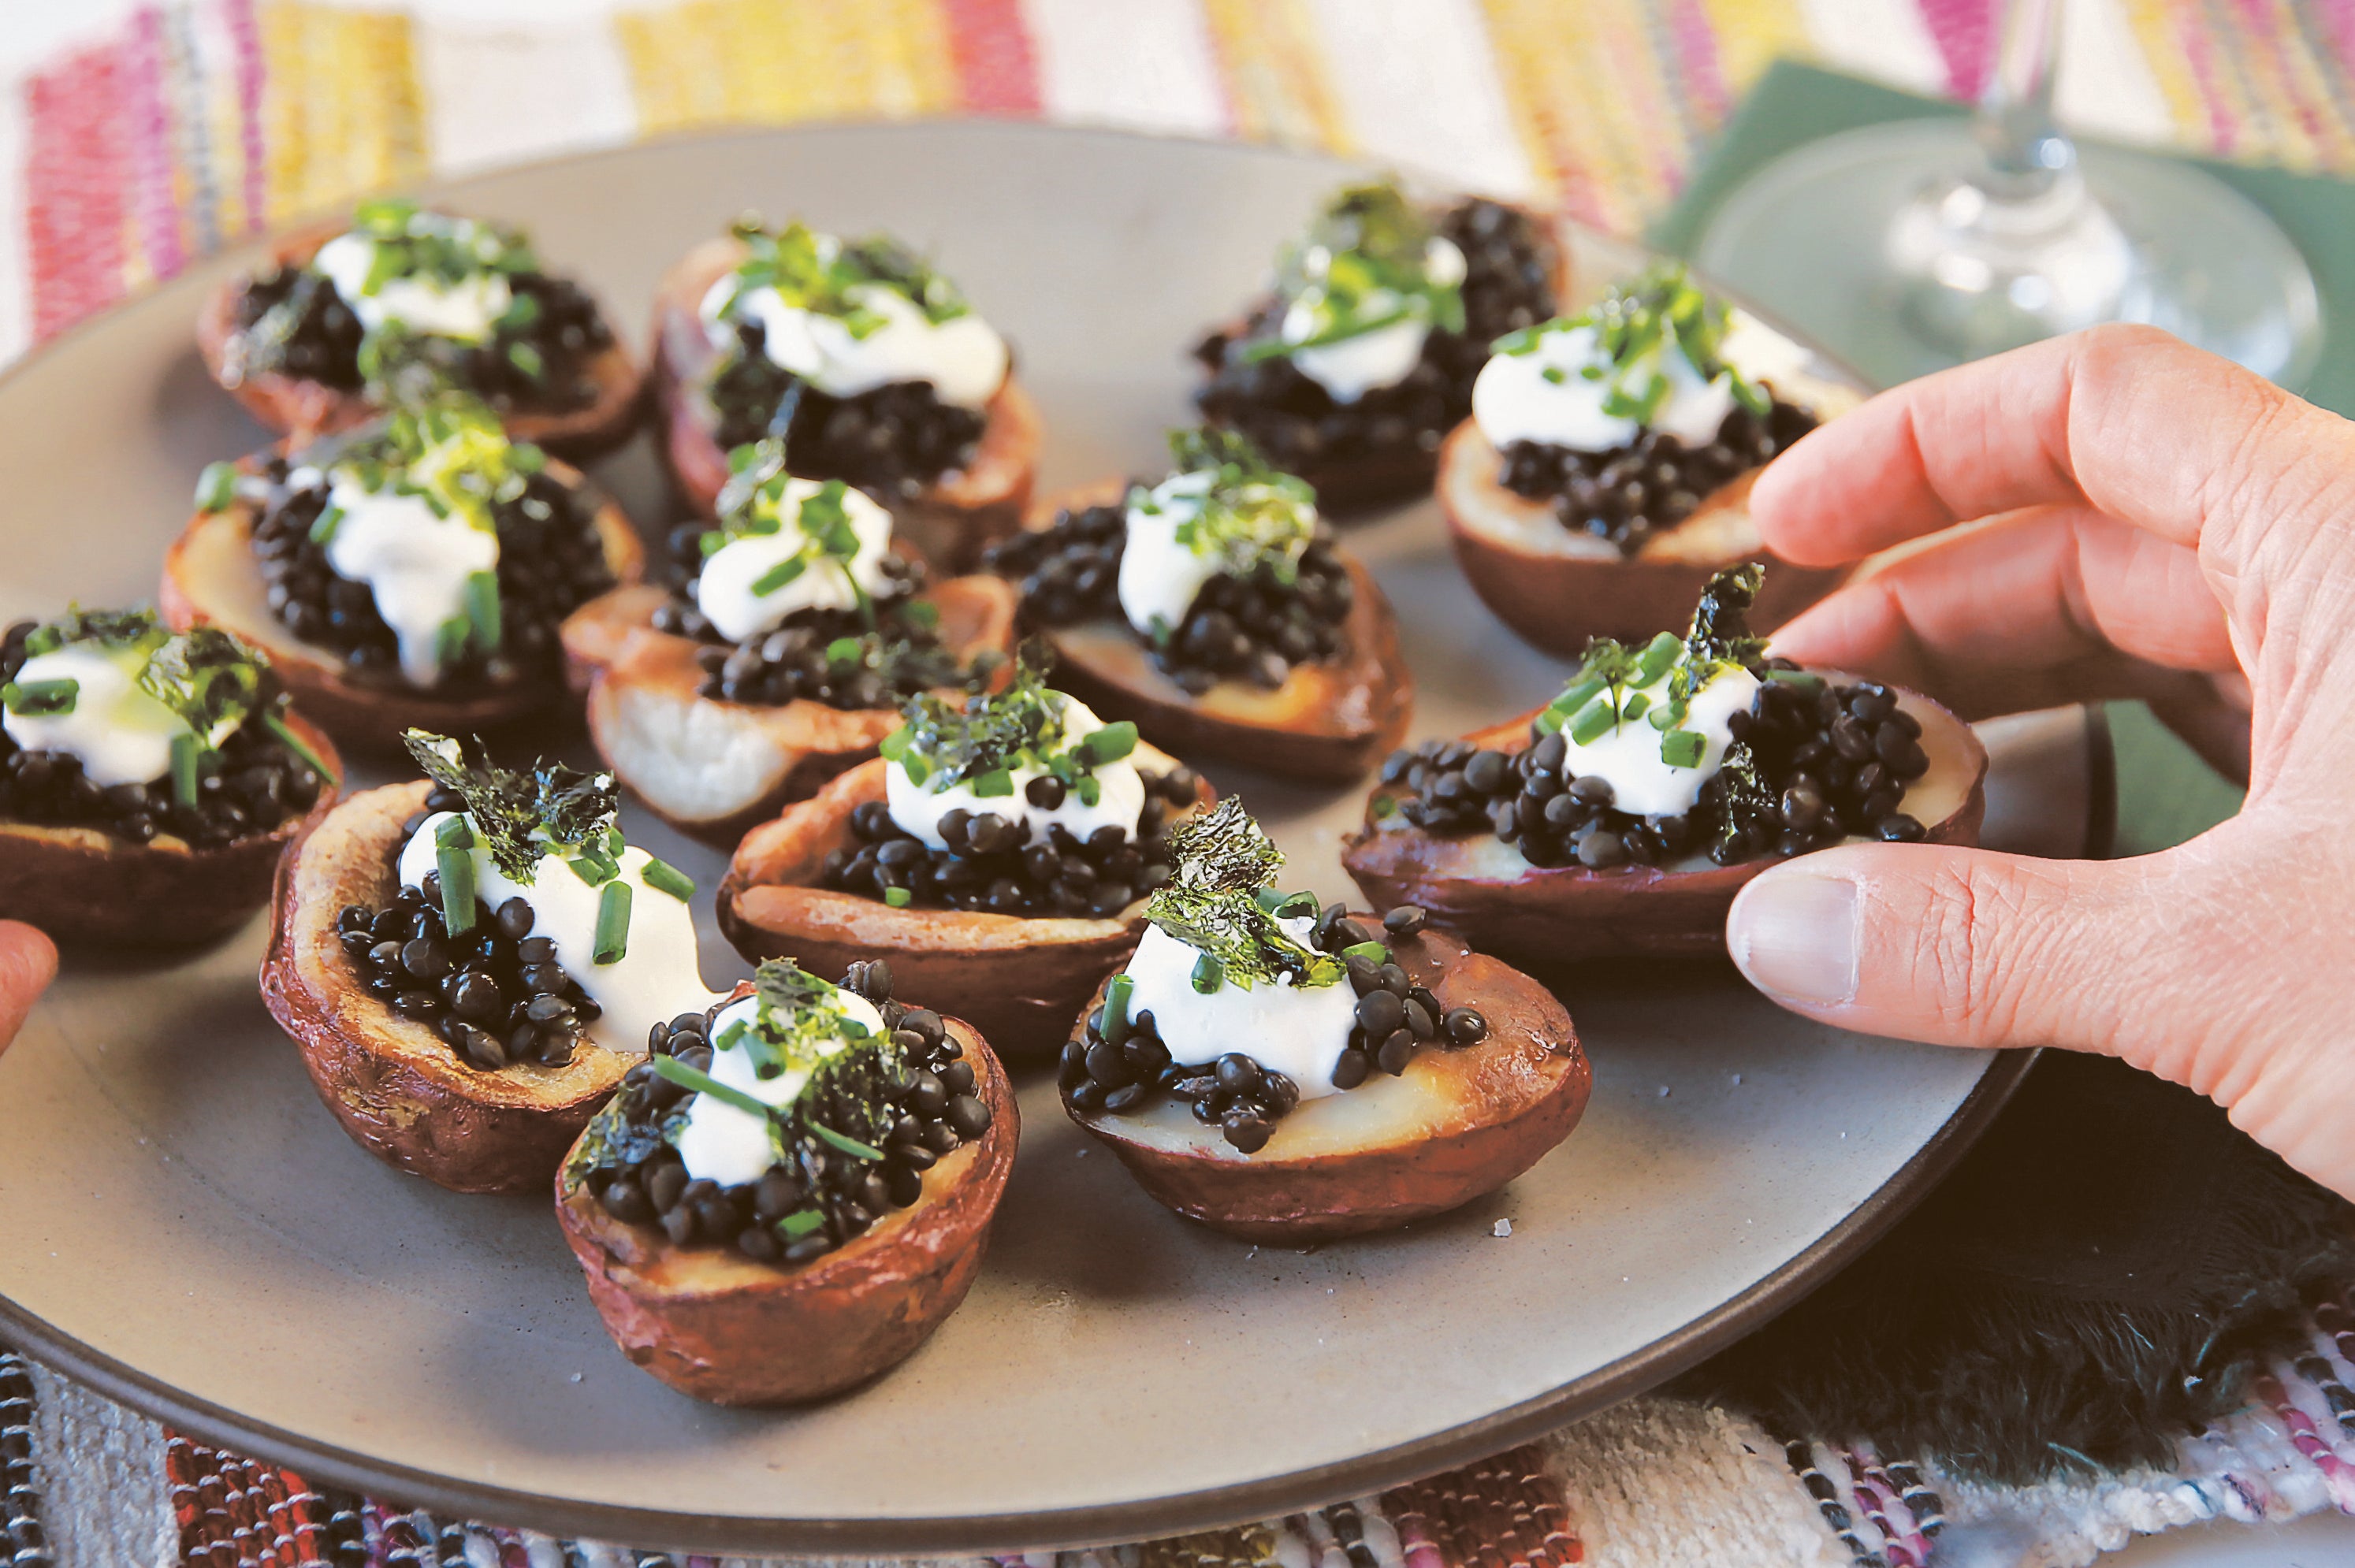 Small potatoes topped with Rancho Gordo black lentils and creme fraiche.